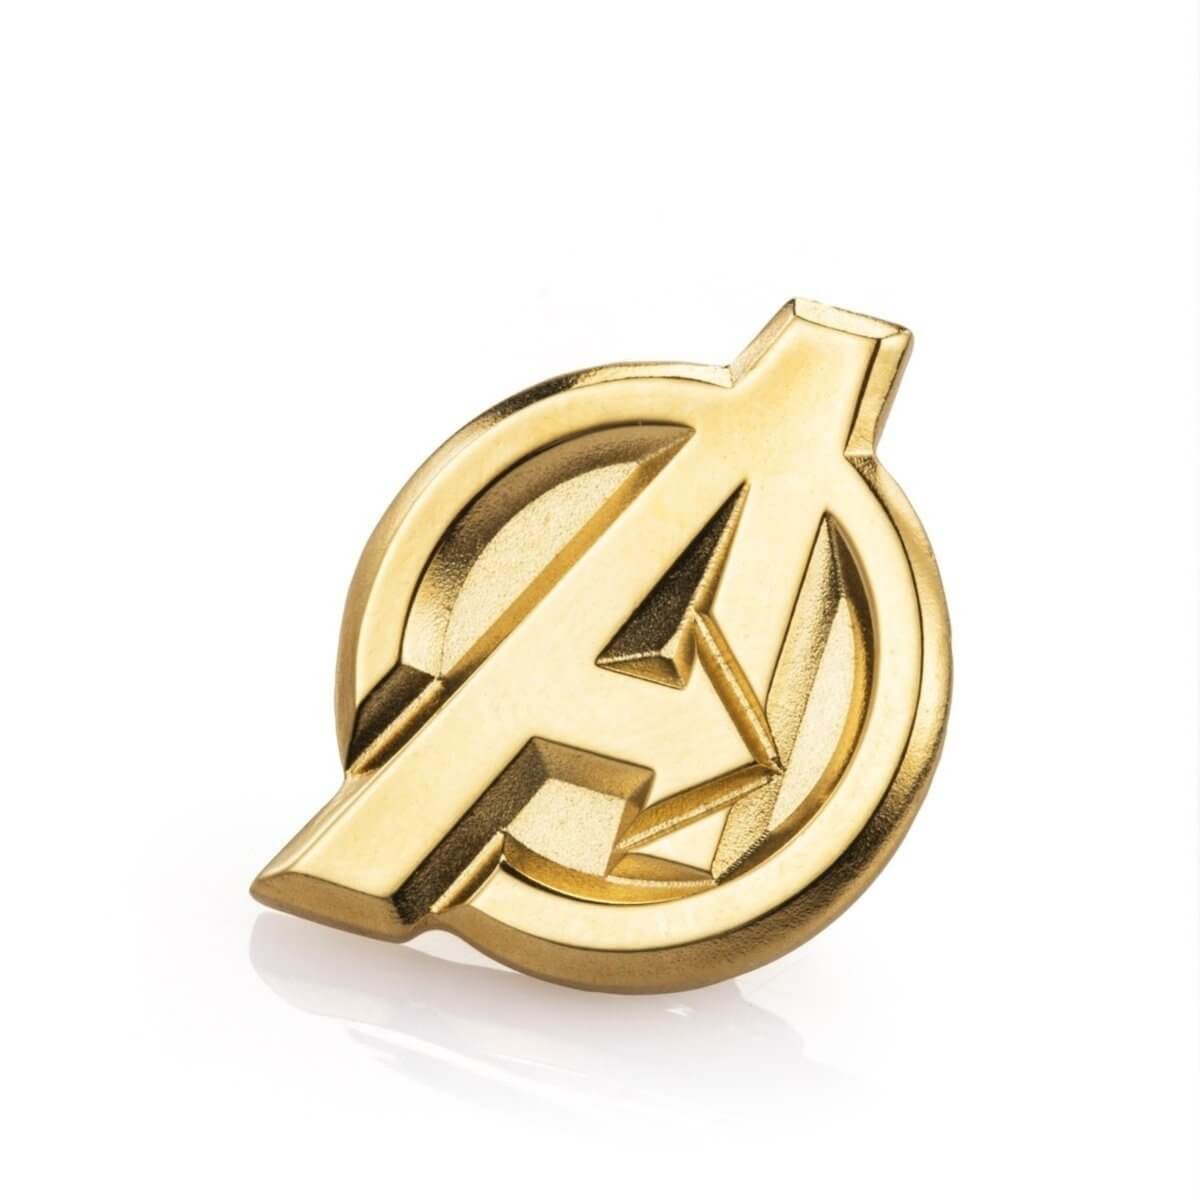 Avengers Gilt Insignia Lapel Pin - Marvel Collectible gift